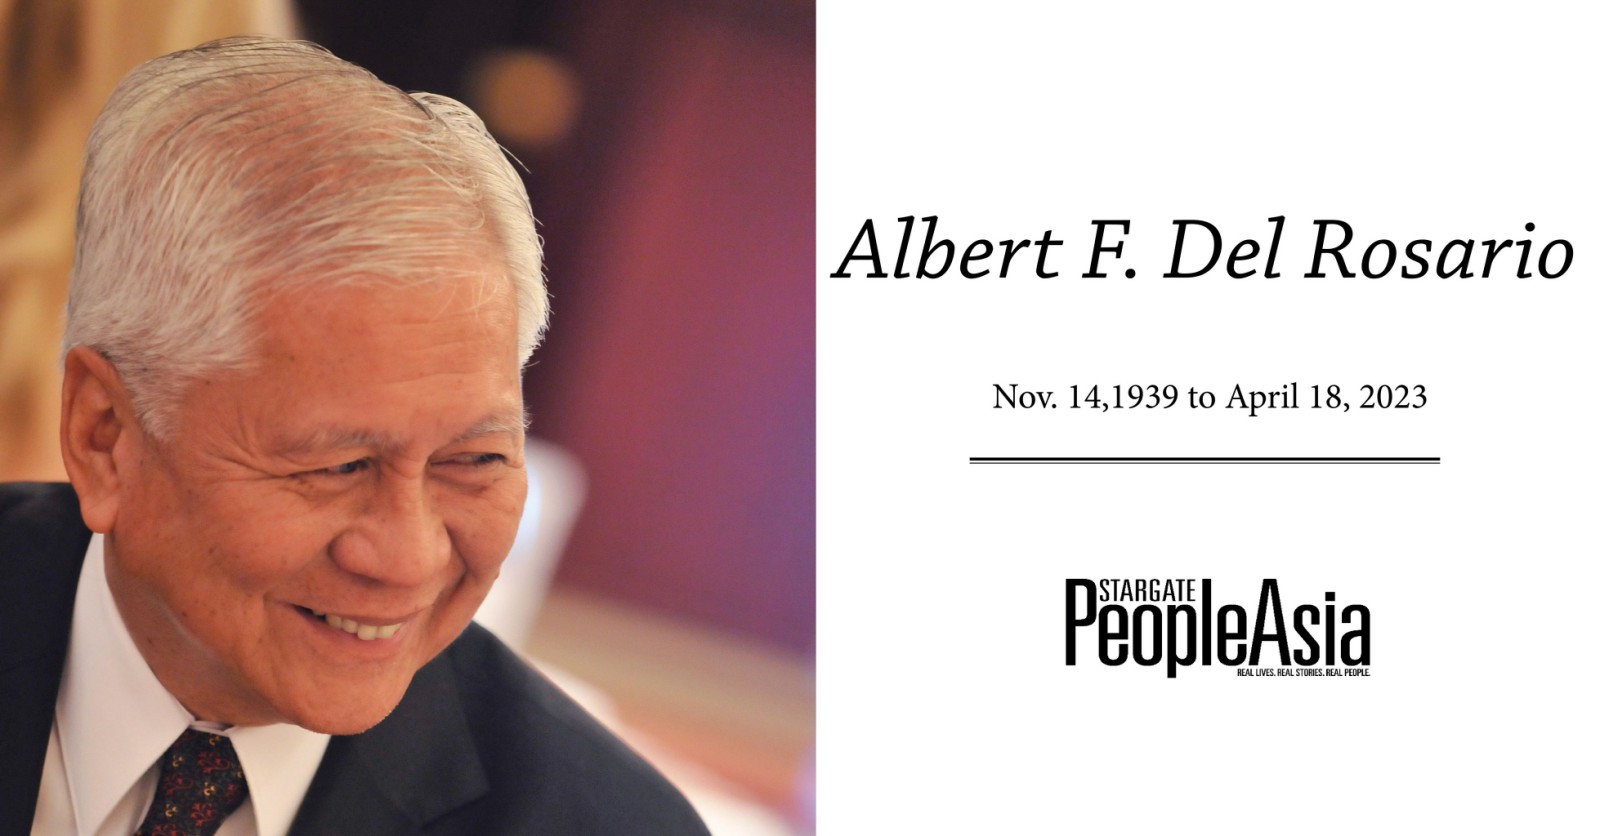 “Right is might:” Remembering former Foreign Secretary Albert F. del Rosario